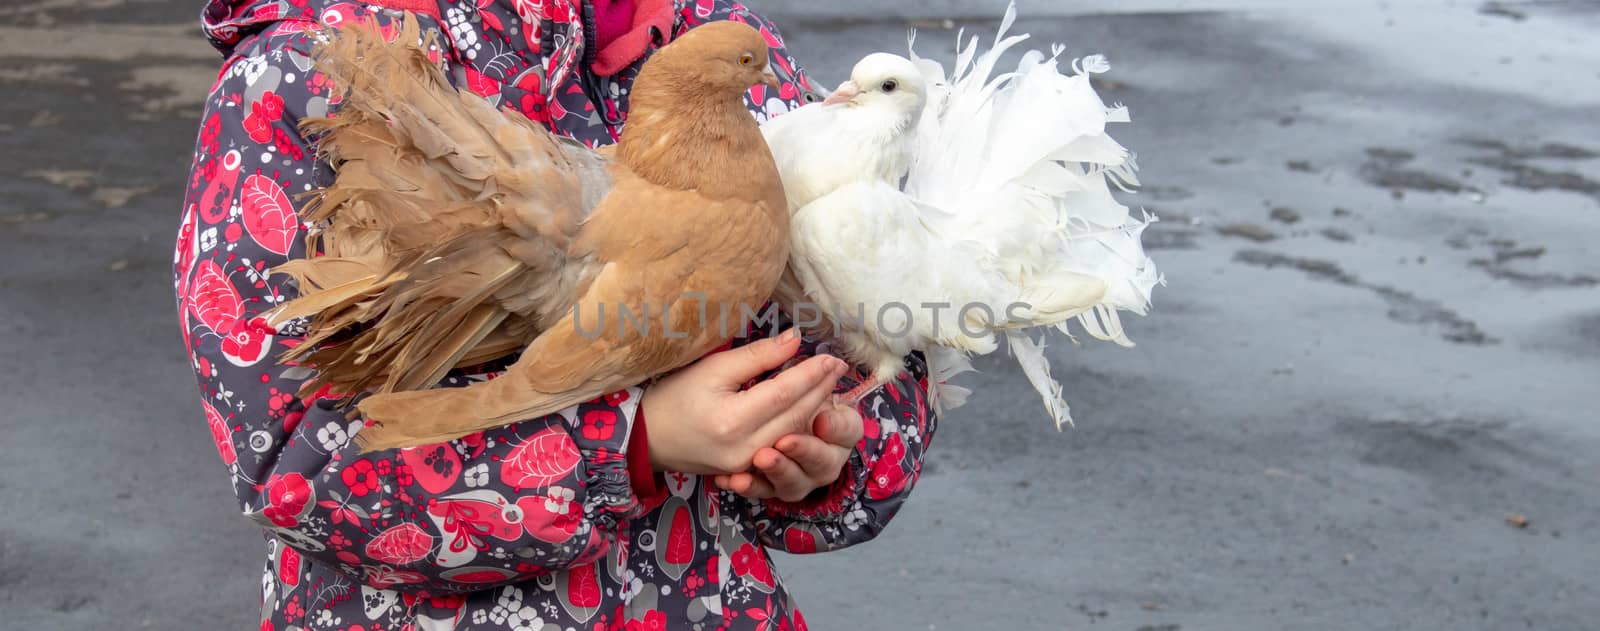 children's hands hold domestic pigeons white and brown by lapushka62